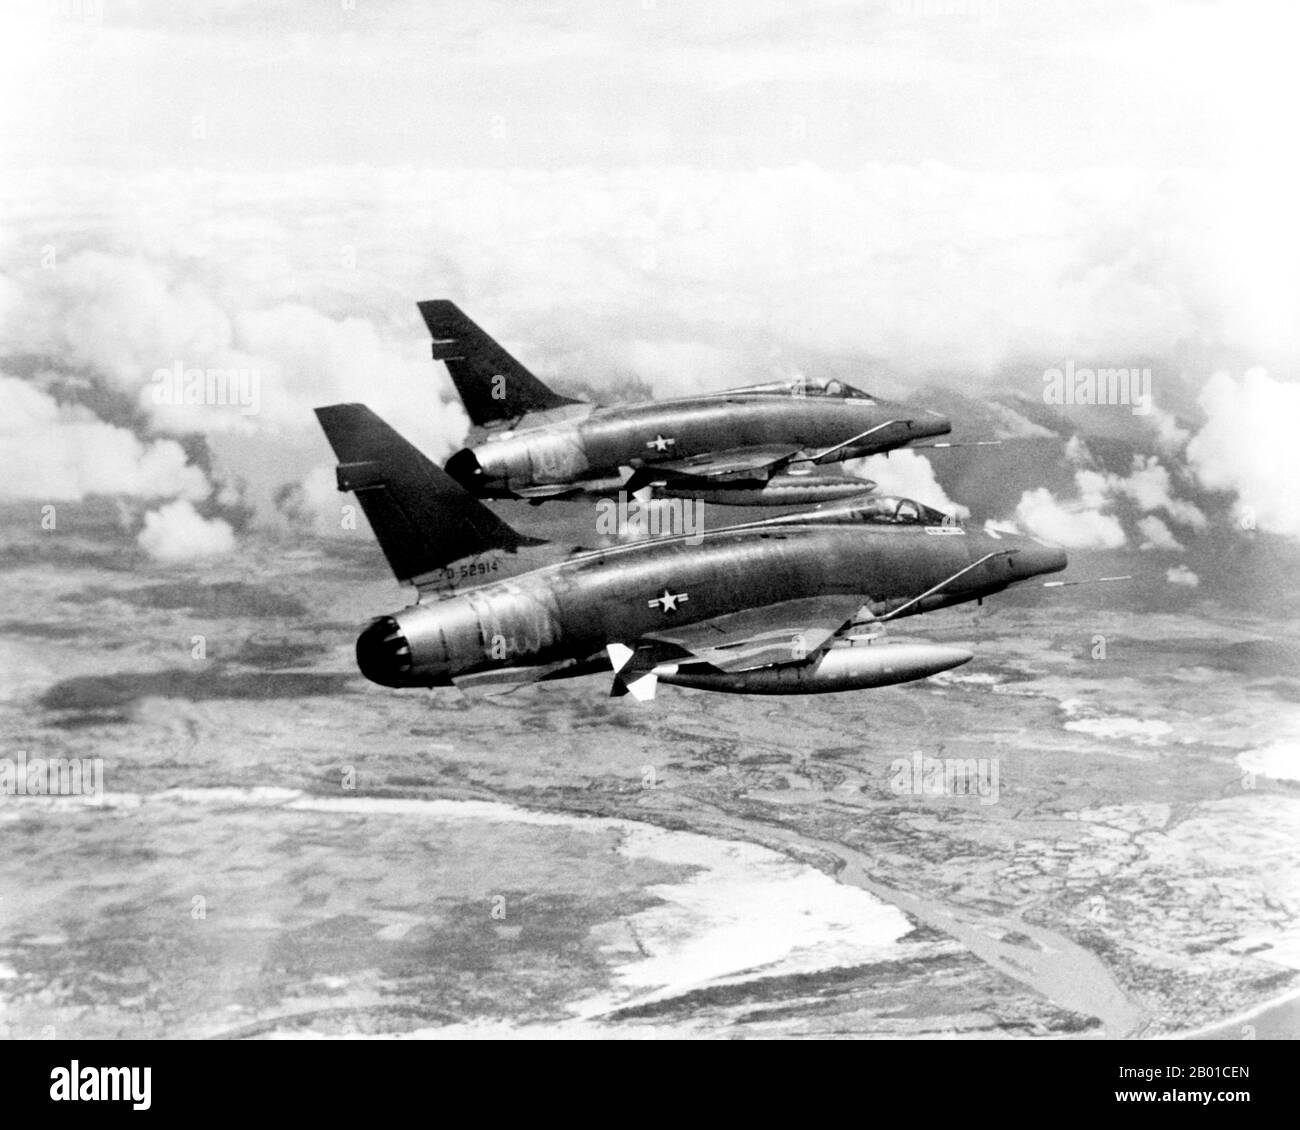 Vietnam: Two USAF F-100D Super Sabre aircraft streaking over South Vietnam on their way to an assigned target, 1967.  The aircraft provided much of the tactical air support to Allied ground forces fighting in Vietnam.  The Second Indochina War, known in America as the Vietnam War, was a Cold War era military conflict that occurred in Vietnam, Laos, and Cambodia from 1 November 1955 to the fall of Saigon on 30 April 1975. This war followed the First Indochina War and was fought between North Vietnam, supported by its communist allies, and the government of South Vietnam, supported by the U.S. Stock Photo